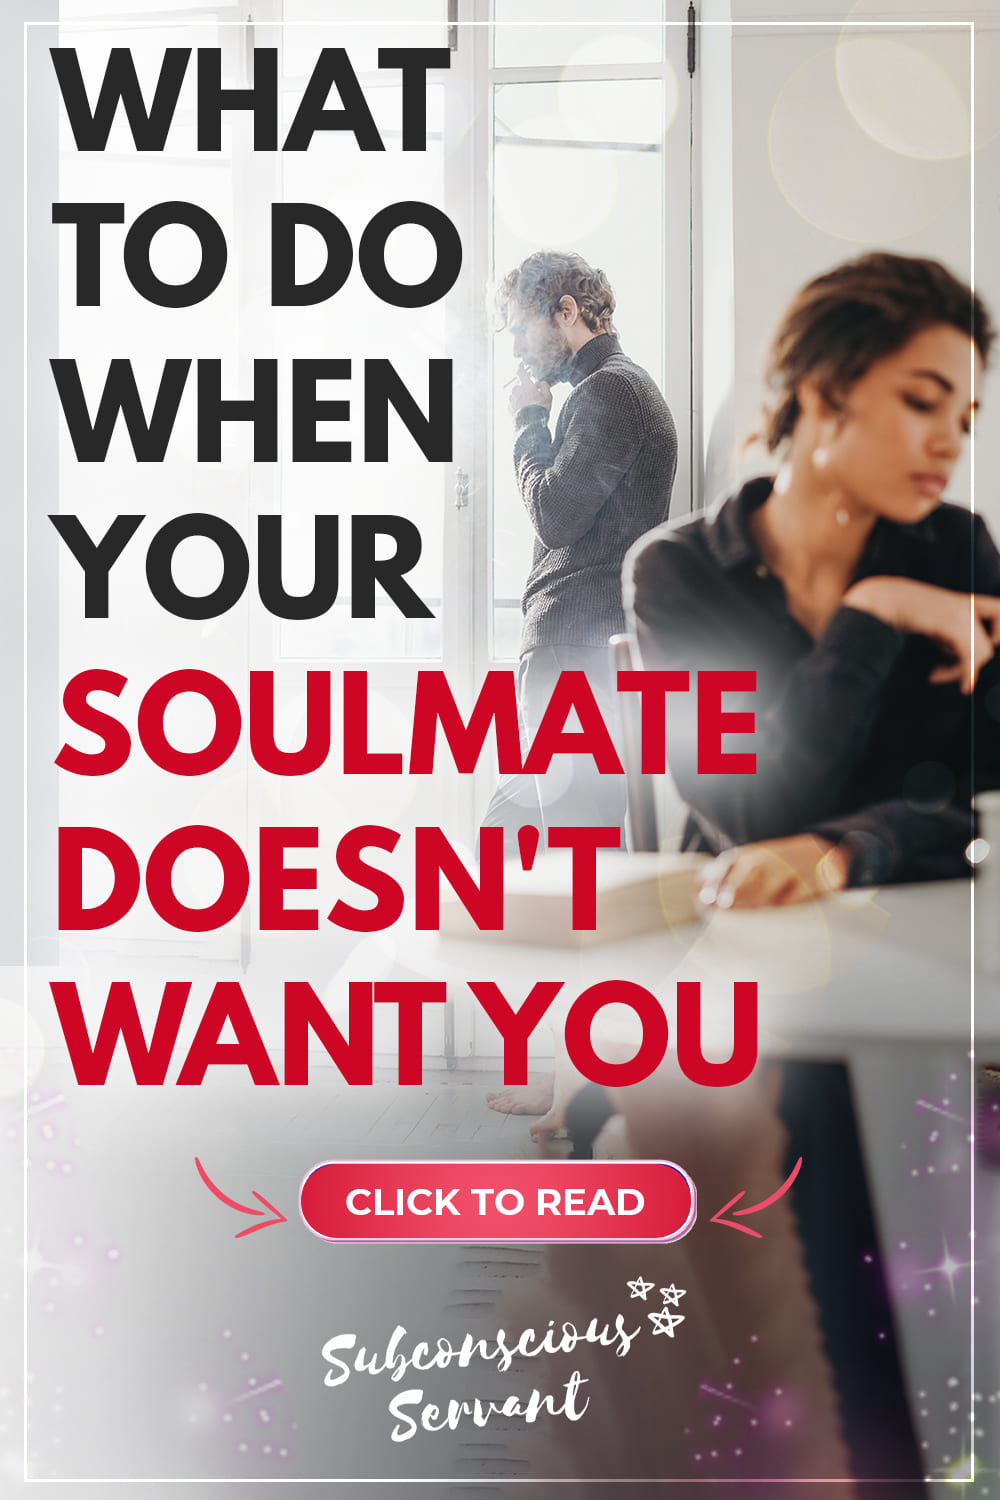 What To Do When Your Soulmate Doesn’t Want You (Soulmate Rejection)